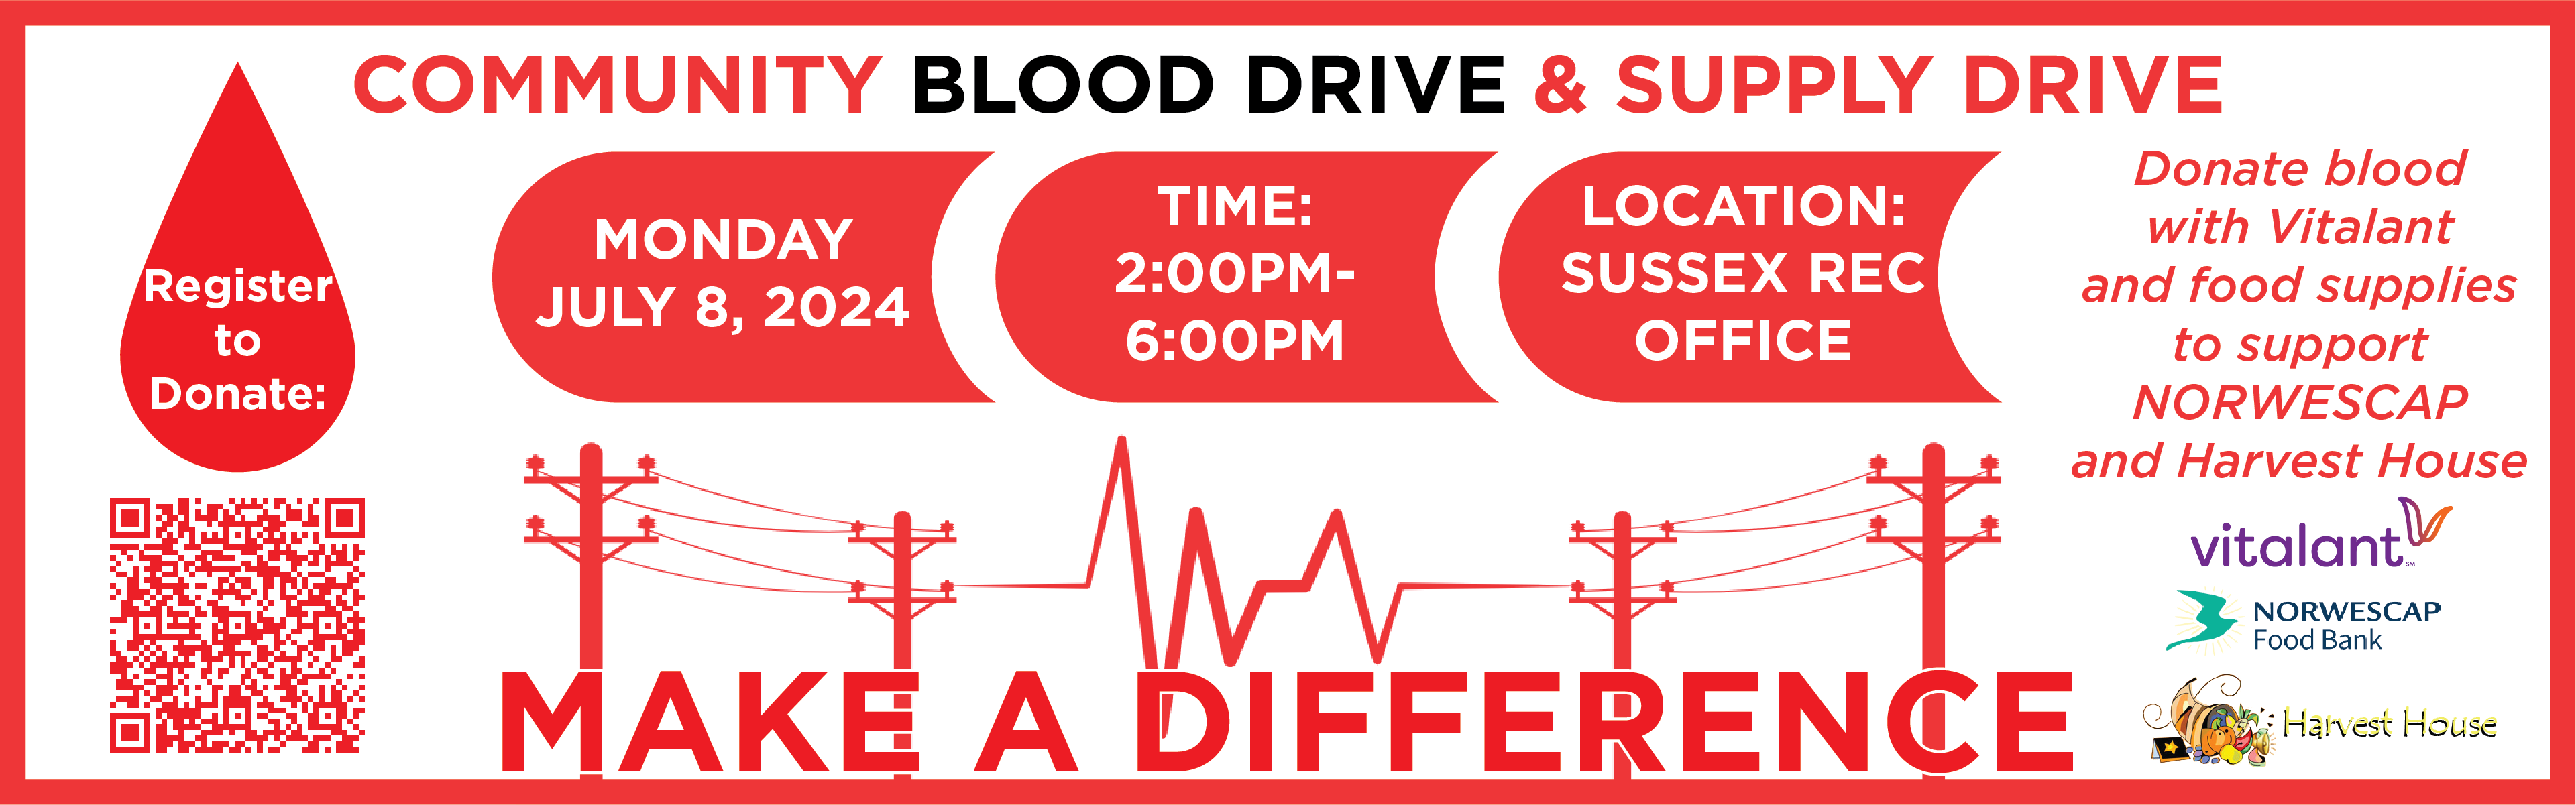 COMMUNITY BLOOD DRIVE & SUPPLY DRIVE. Monday, July 8, 2024. Time: 2:00pm - 6:0pm. Location: Sussex REC office. MAKE A DIFFERENCE. Donate blood with Vitalant or food supplies to support NORWESCAP and Harvest House!